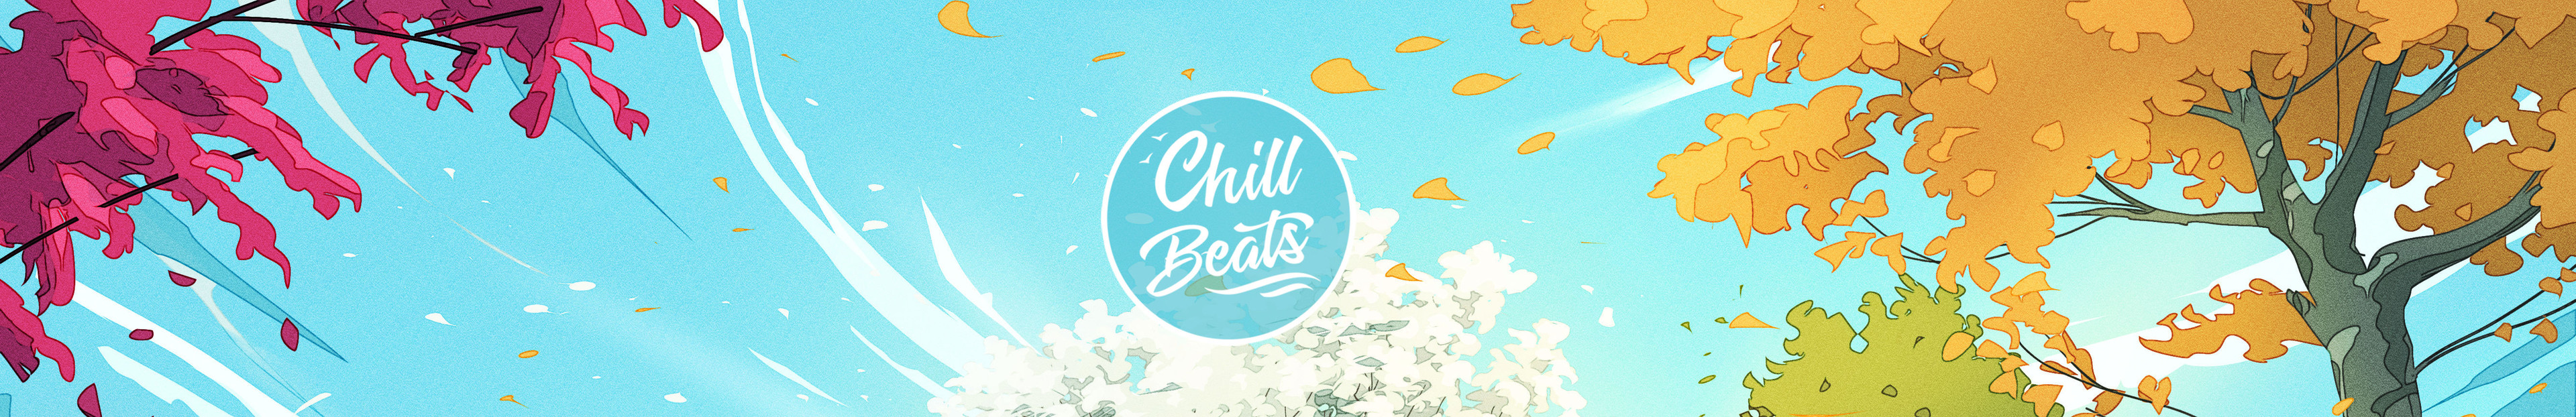 Cover Illustrations for Chill Beats Records and the various music artists in collaboration.